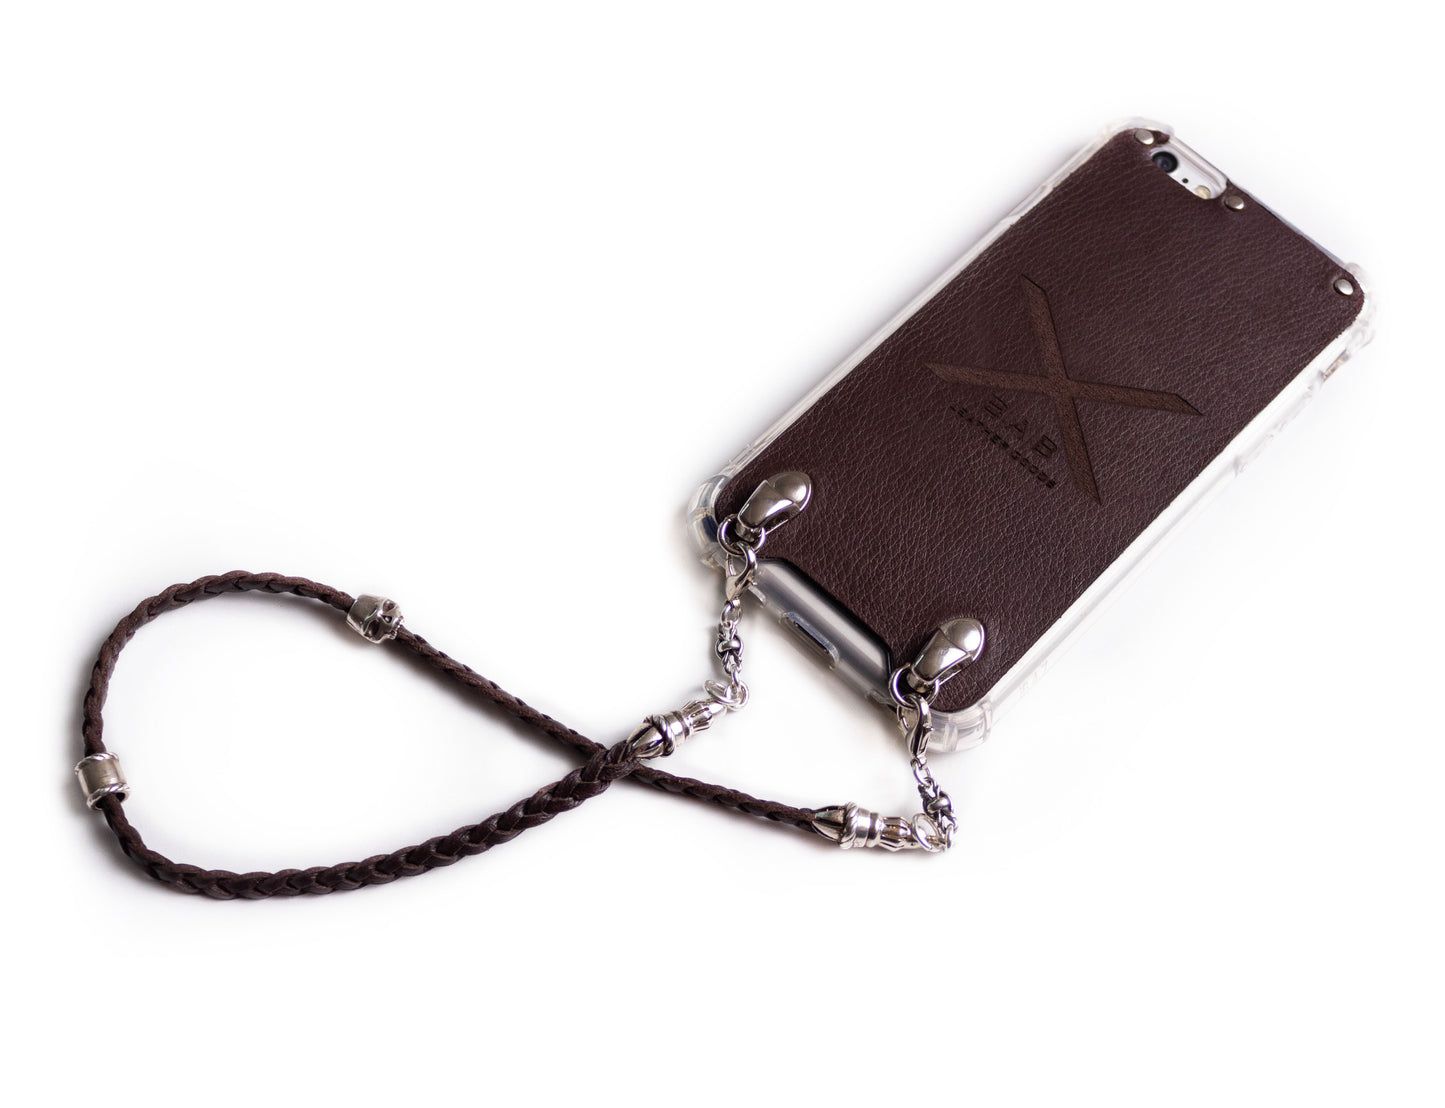 Full-Grain Genuine vegetable-tanned Leather & 925 Sterling Silver Case for iPhone. Bracelet/Choker/Strap 3 double strands of hand-braided Leather, Brown or Black.- F03